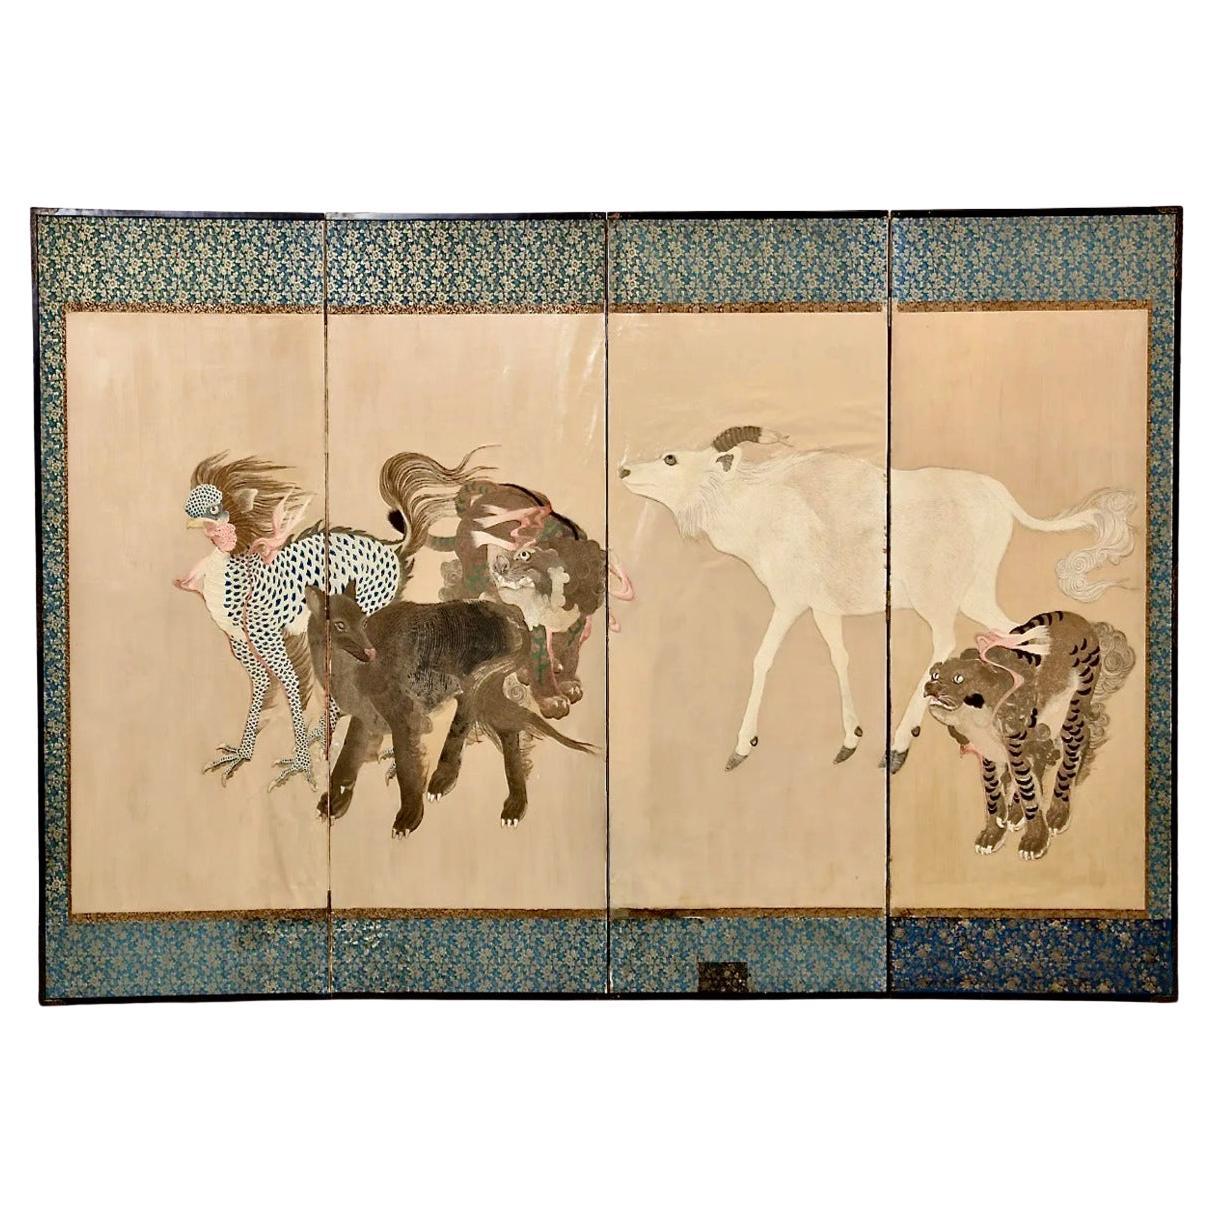 Japanese Kyoto Embroidered Screen For Sale